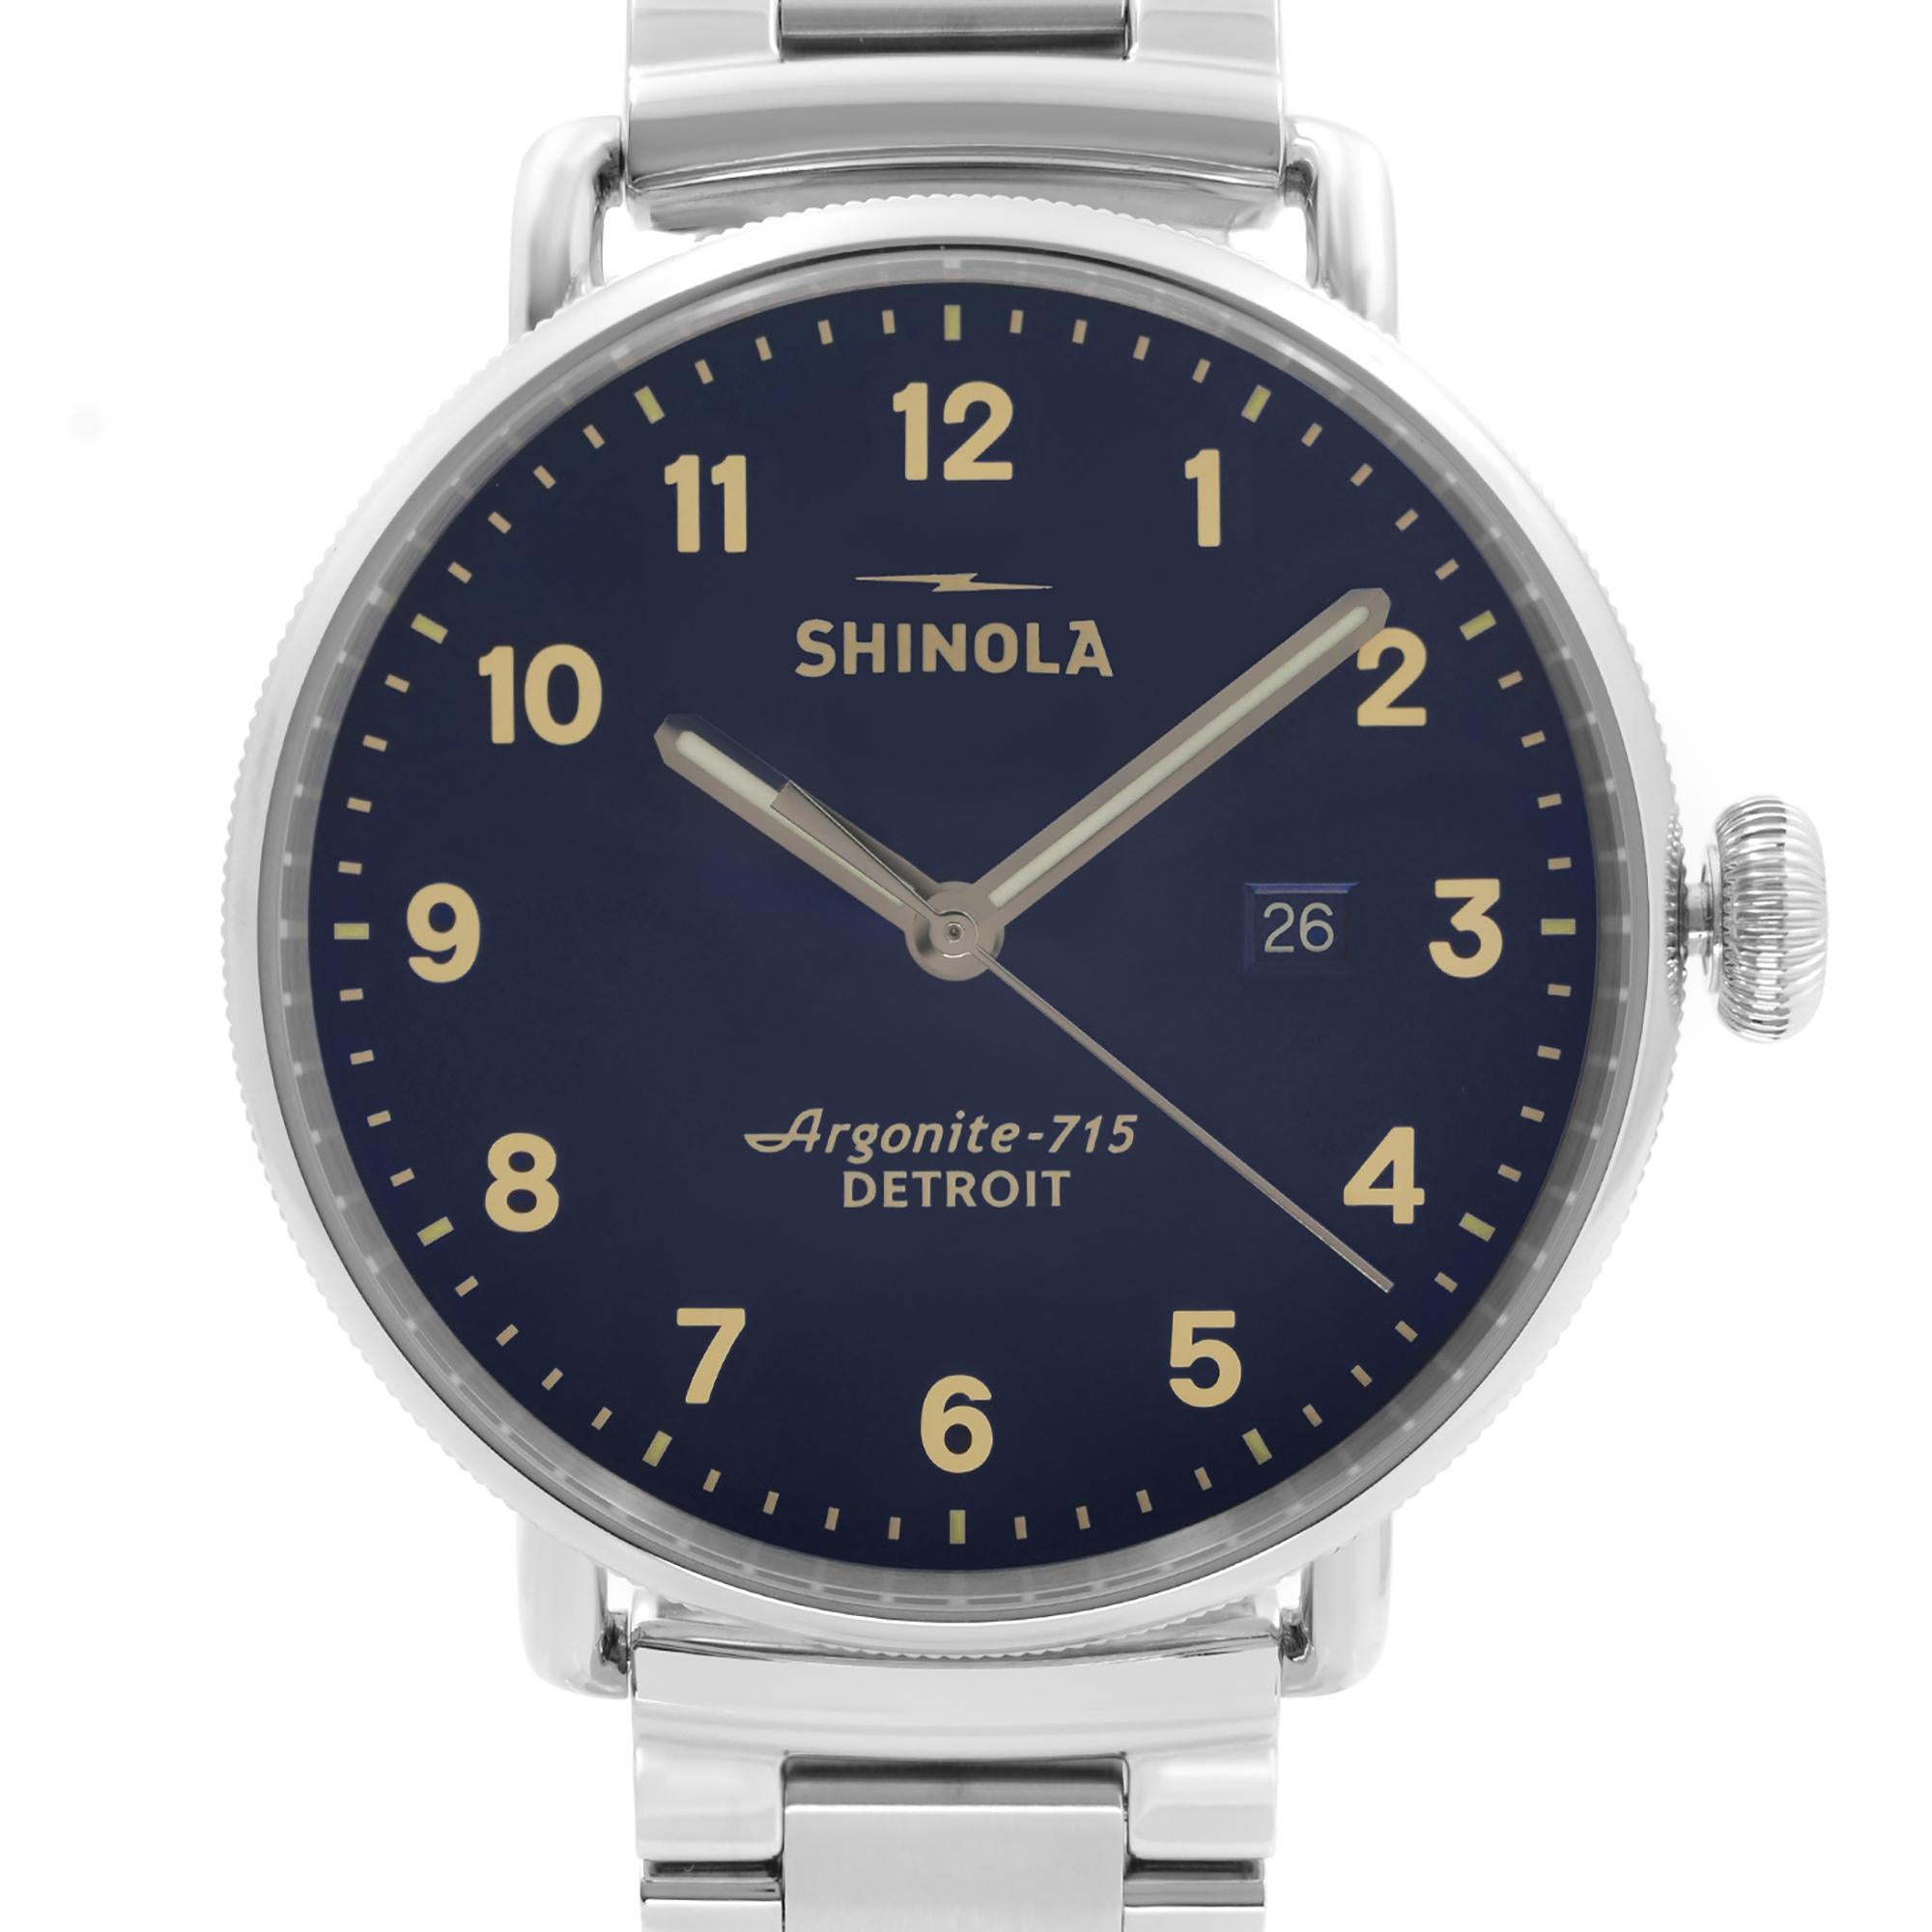 Great condition. The case back has some minor scratches. Wrist size 7 inches

 Brand: Shinola  Type: Wristwatch  Department: Men  Model Number: S0120018331  Country/Region of Manufacture: United States  Style: Dress/Formal  Model: Shinola The